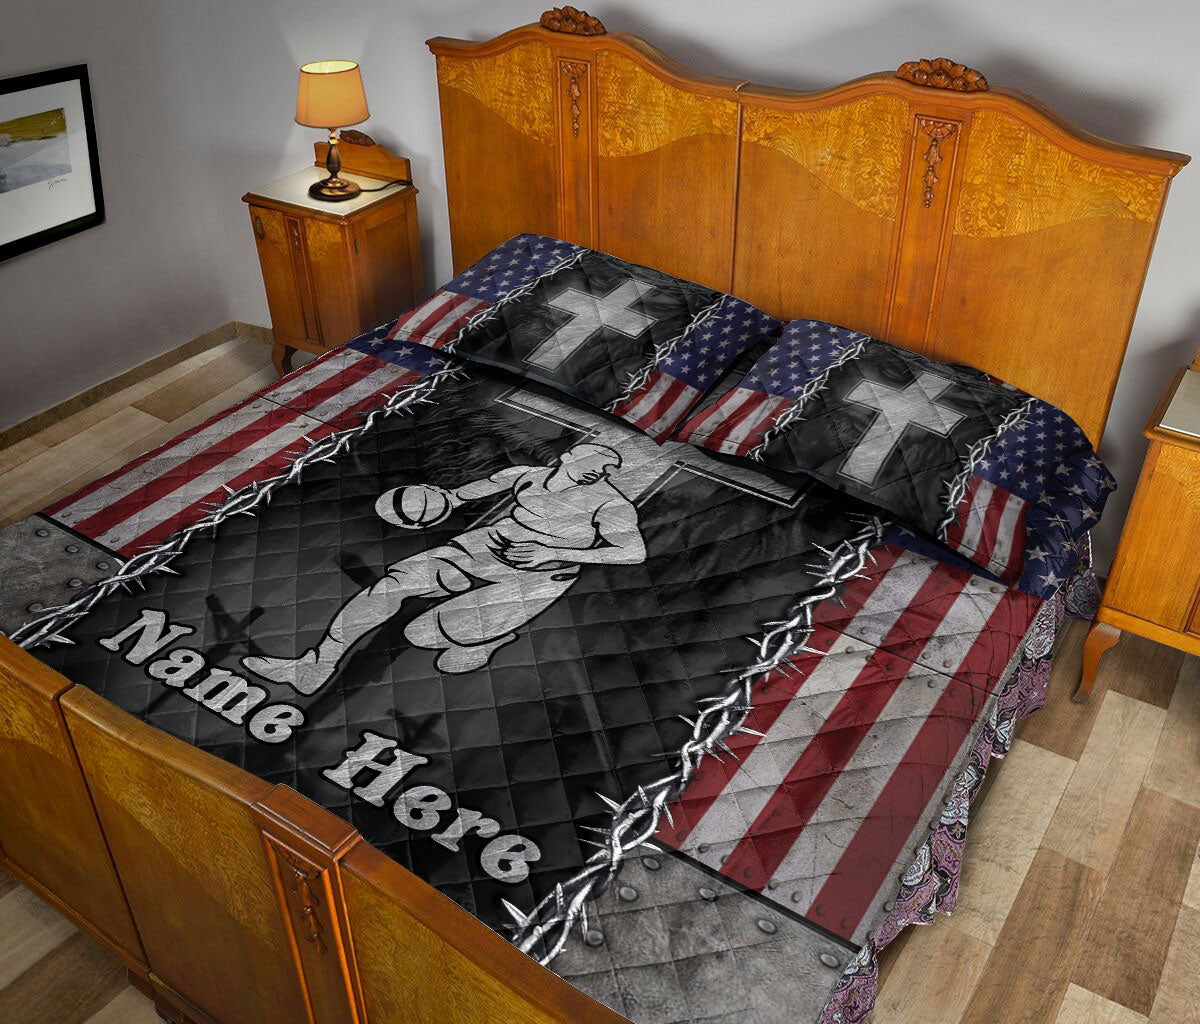 Ohaprints-Quilt-Bed-Set-Pillowcase-Basketball-Christian-Jesus-Cross-American-Us-Flag-Custom-Personalized-Name-Blanket-Bedspread-Bedding-355-Queen (80'' x 90'')